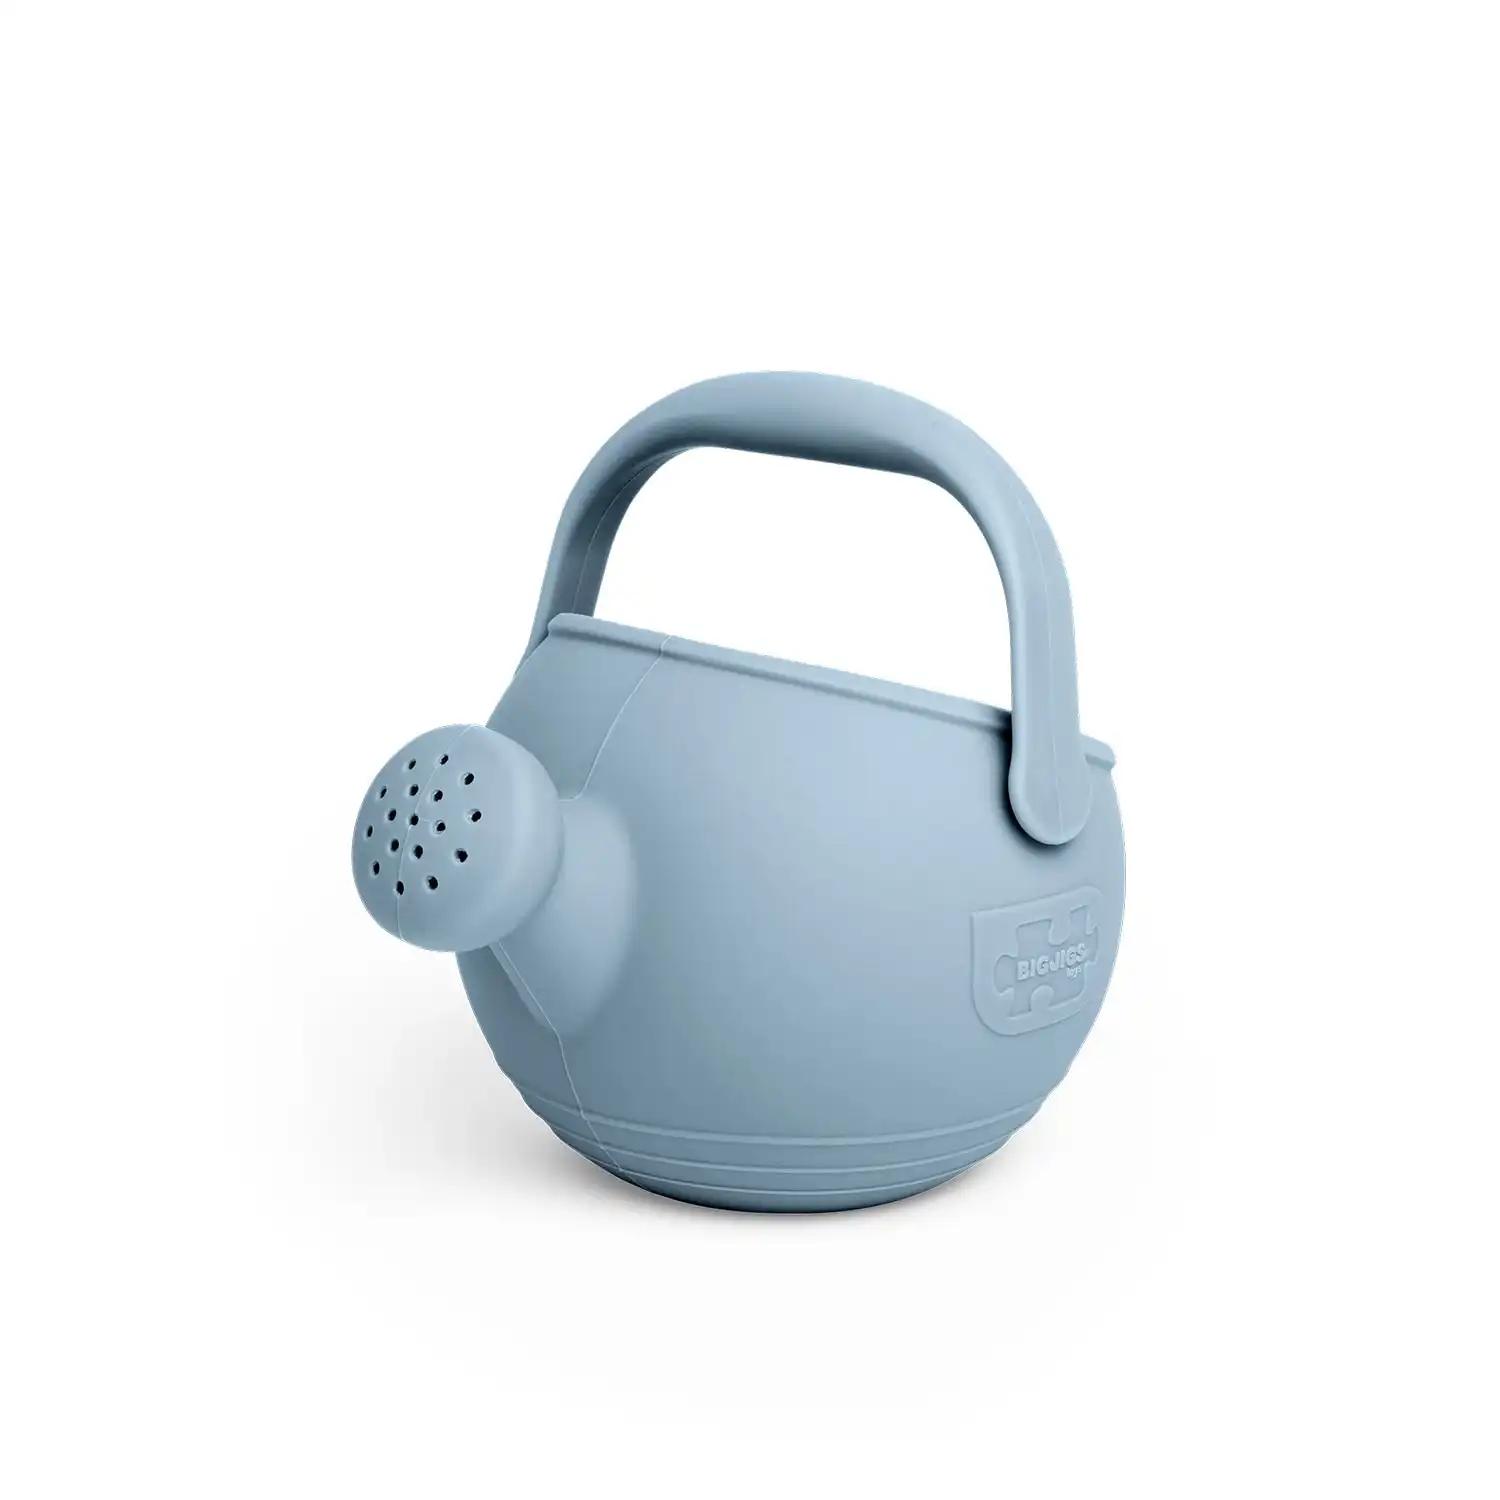 Dove Grey Silicone Watering Can